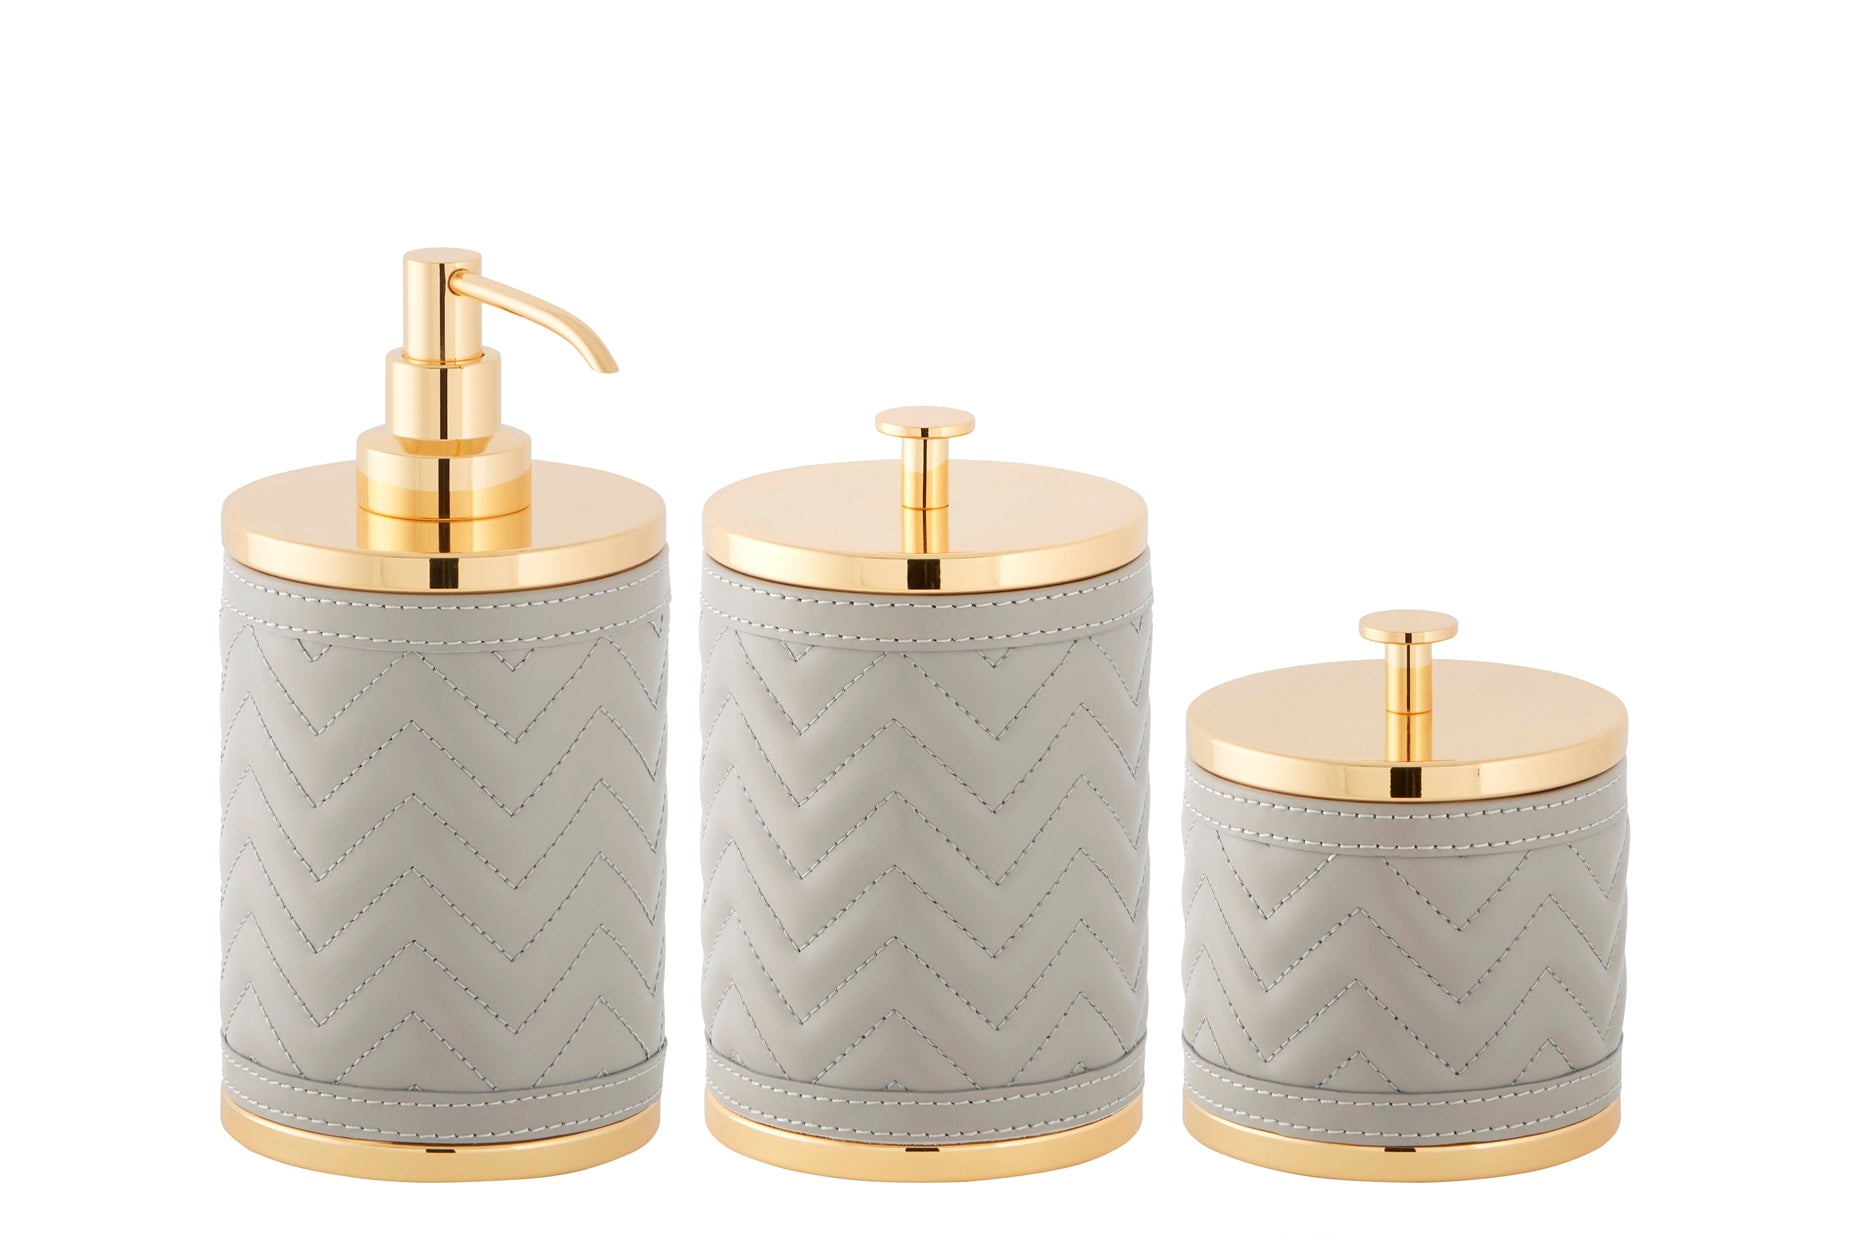 Riviere Alghero Quilted Herringbone Leather Soap Dispenser | Covered with Quilted Herringbone Padded Leather | Features Chrome or Gold Metal Finish | Adds Elegance to Bathrooms